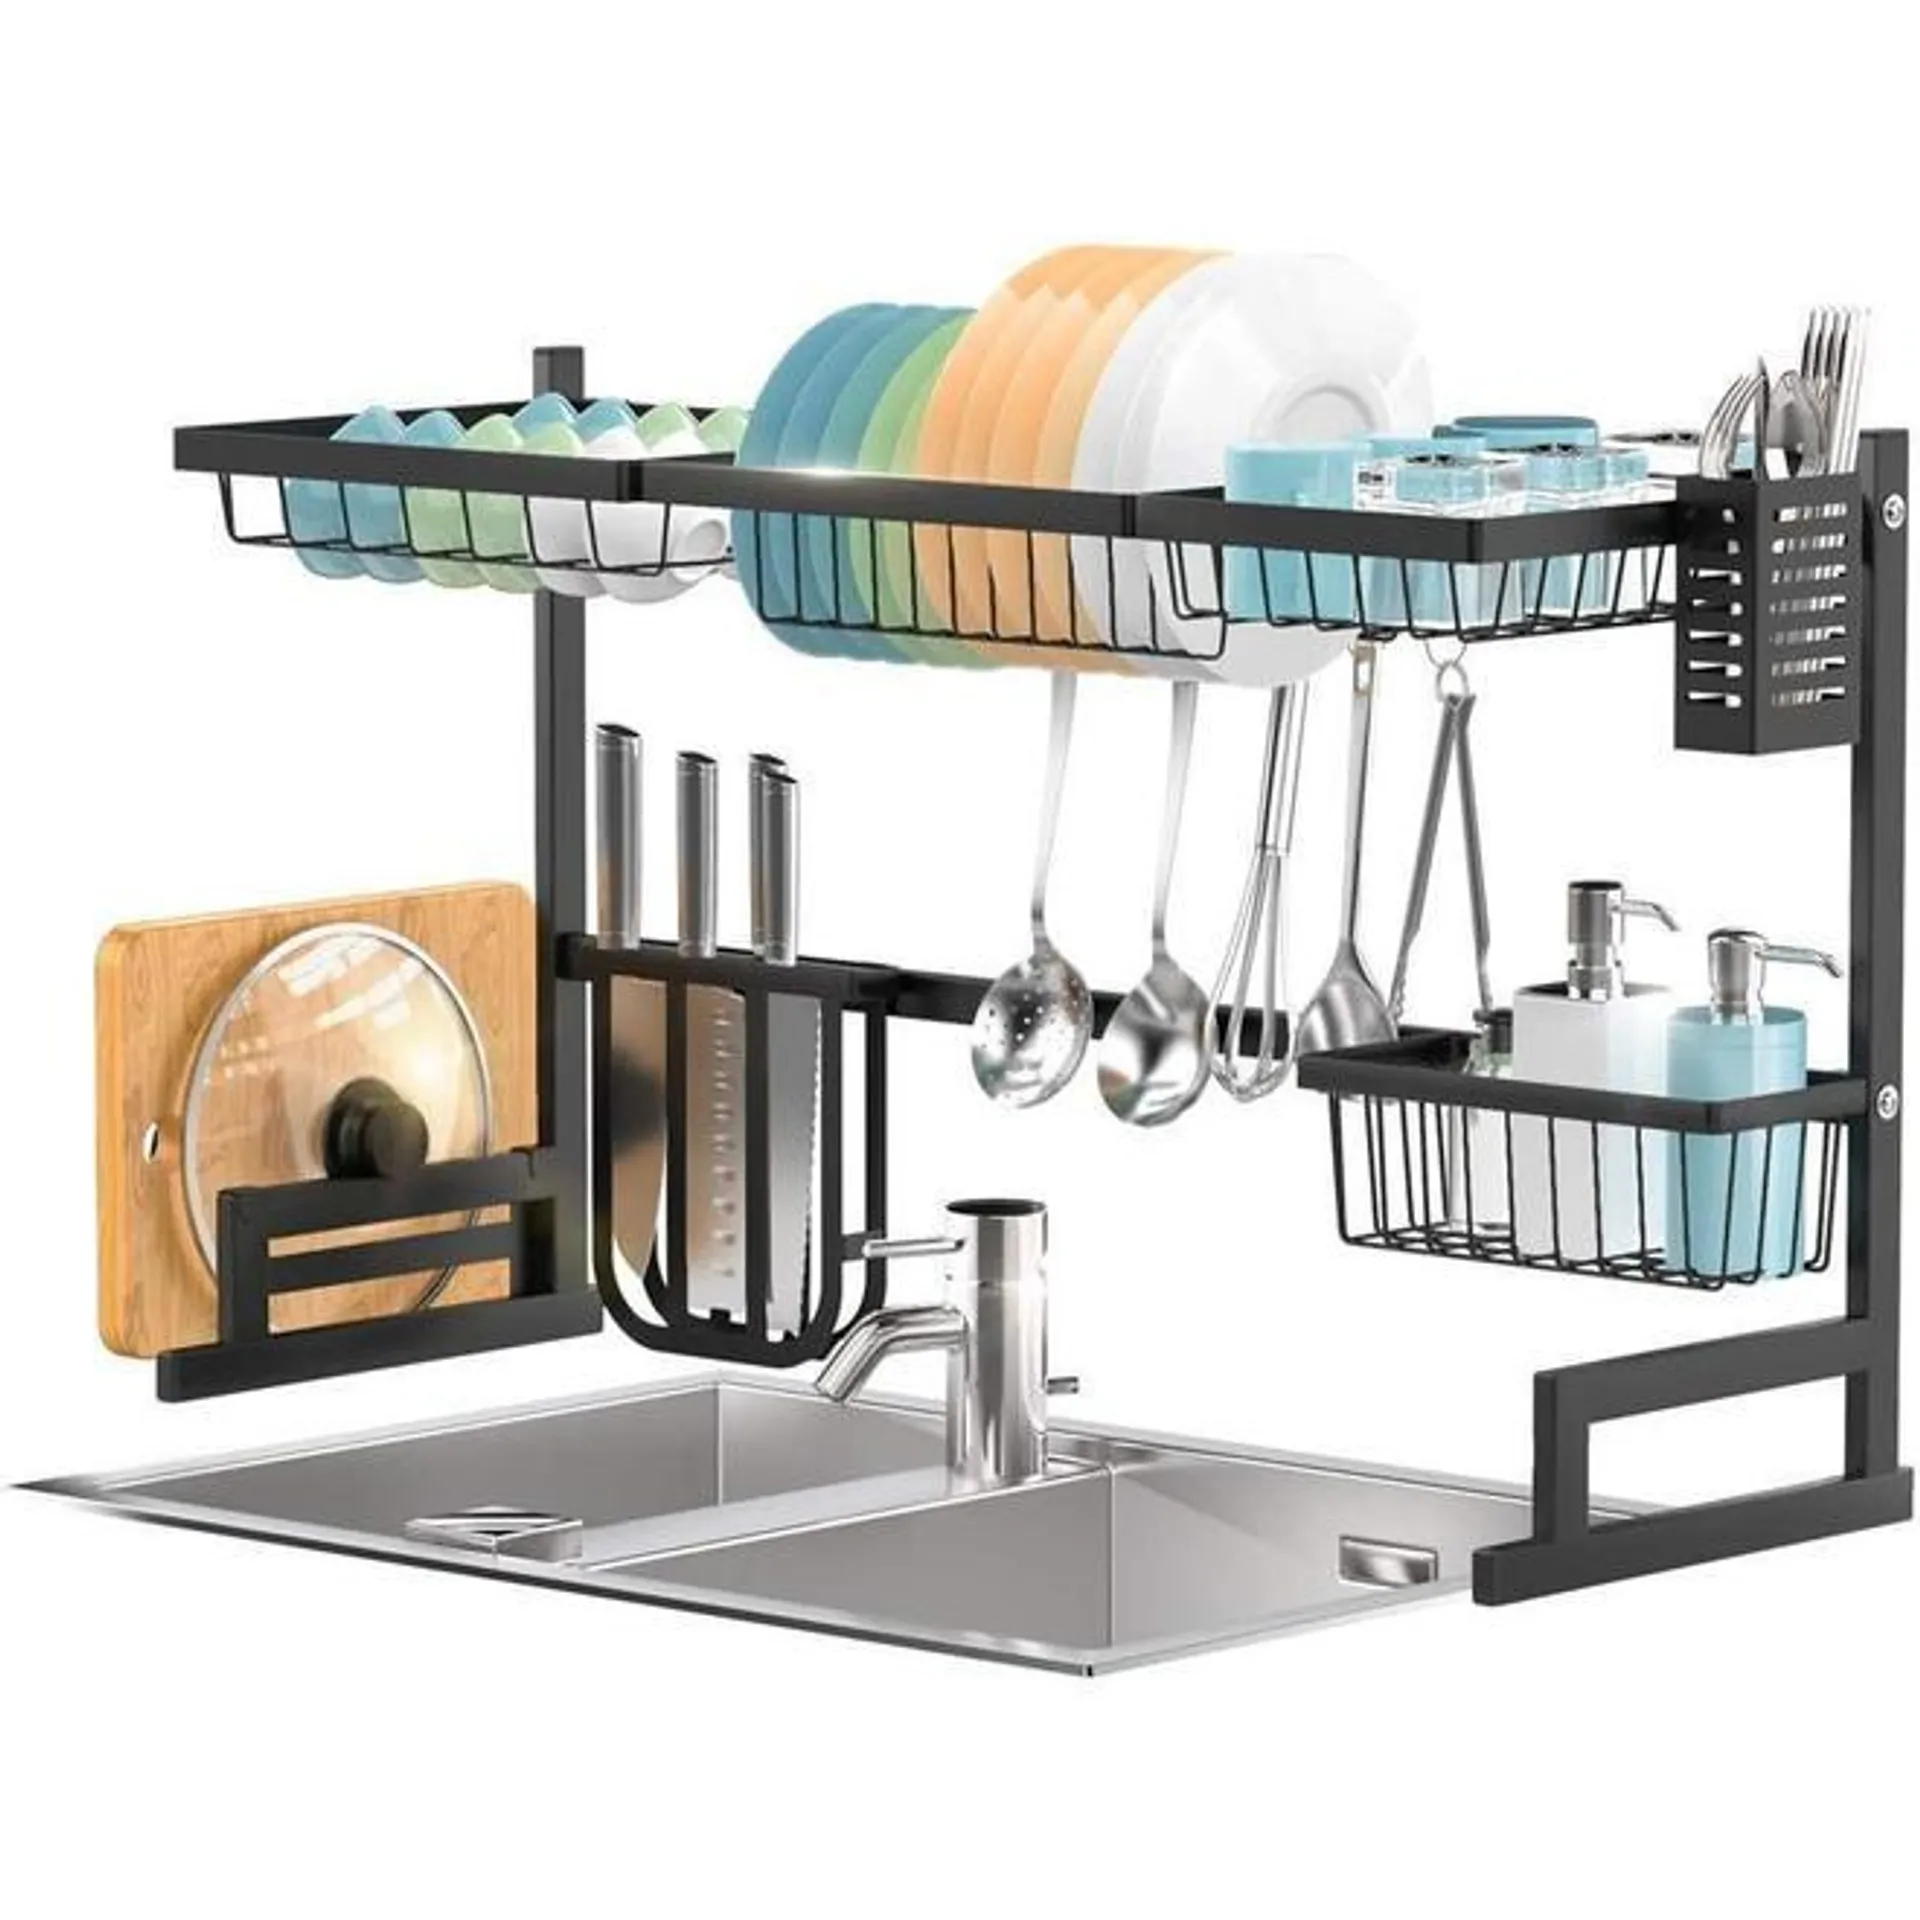 Dish Drying Rack Over The Sink, Adjustable Large Dish Rack Drainer - SortWise®